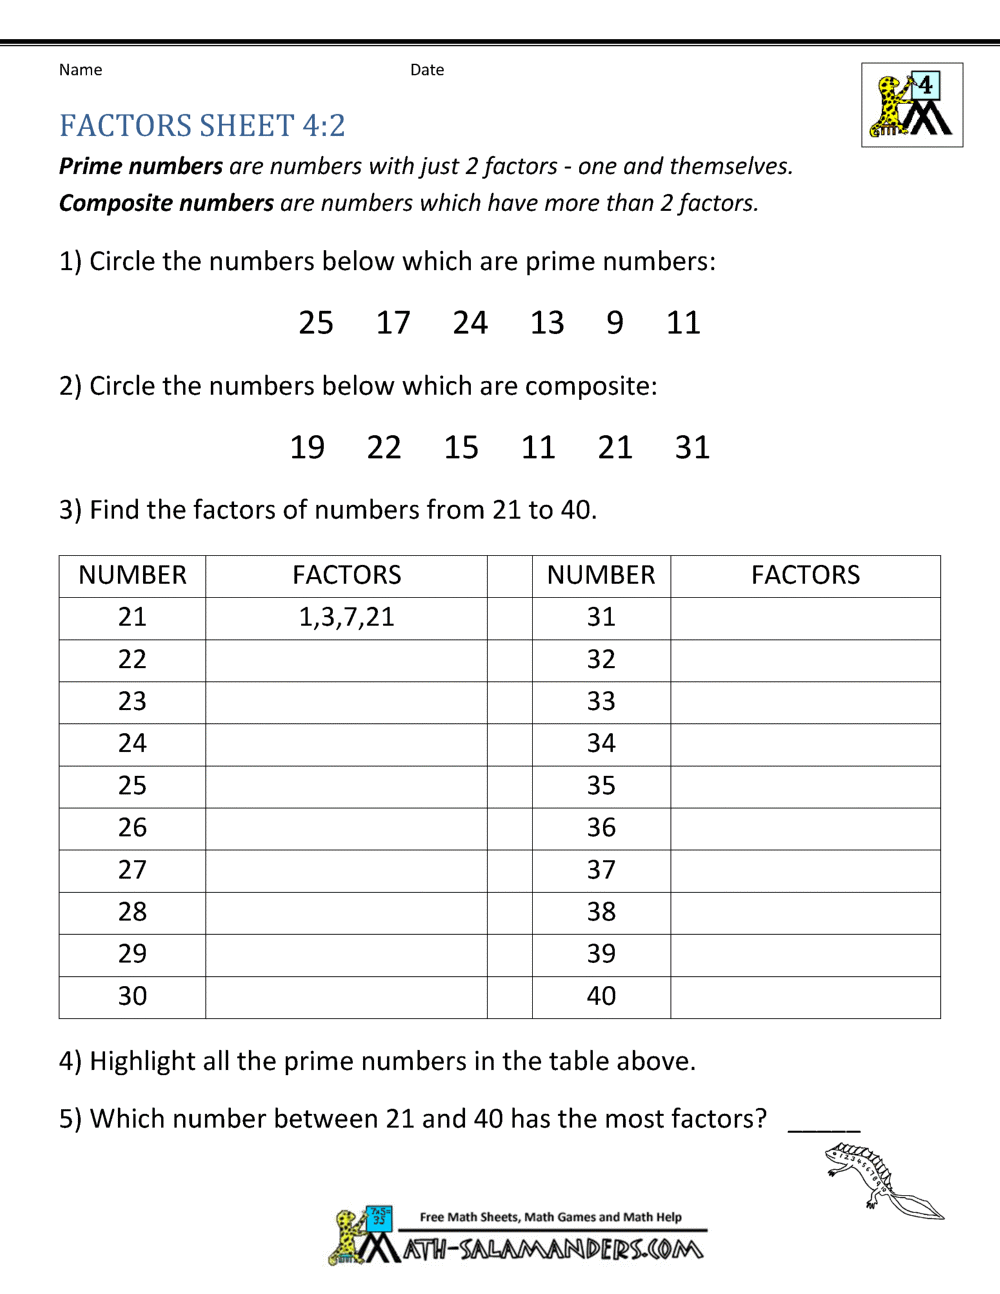 4th-grade-math-practice-multiples-factors-and-inequalities